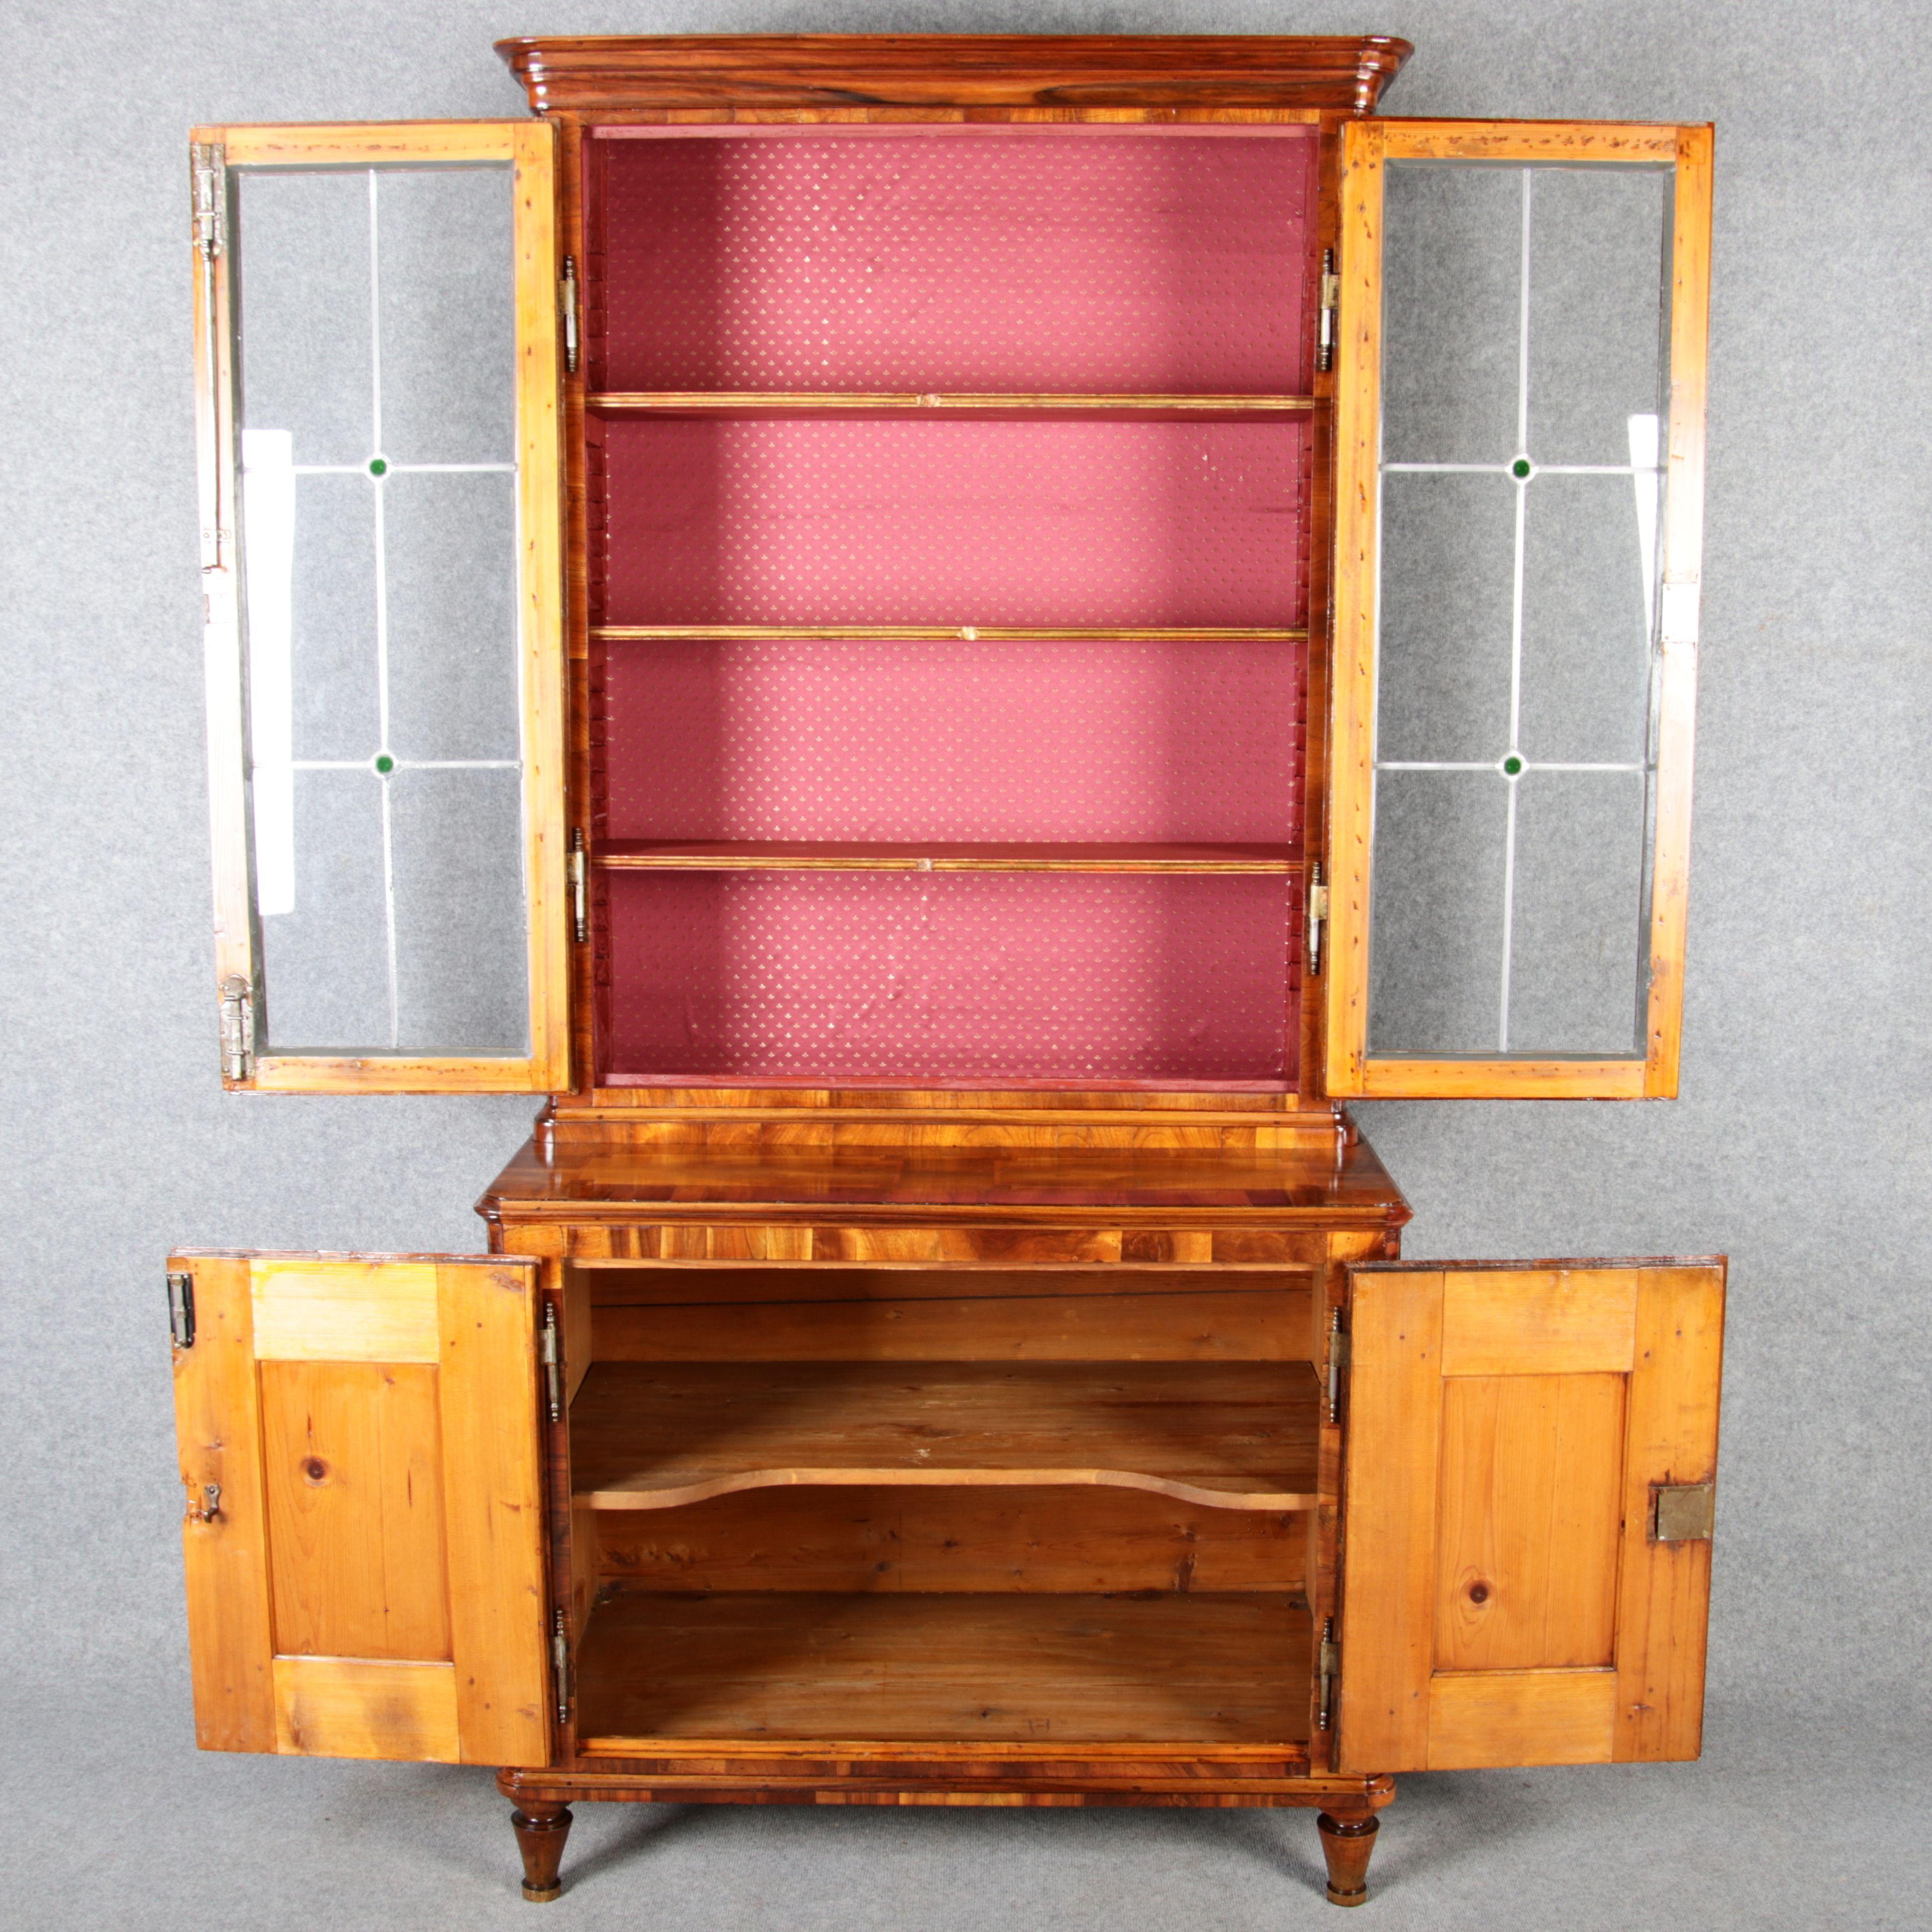 Hand-Crafted Baroque Display Case Bookcase Walnut, 18th Century